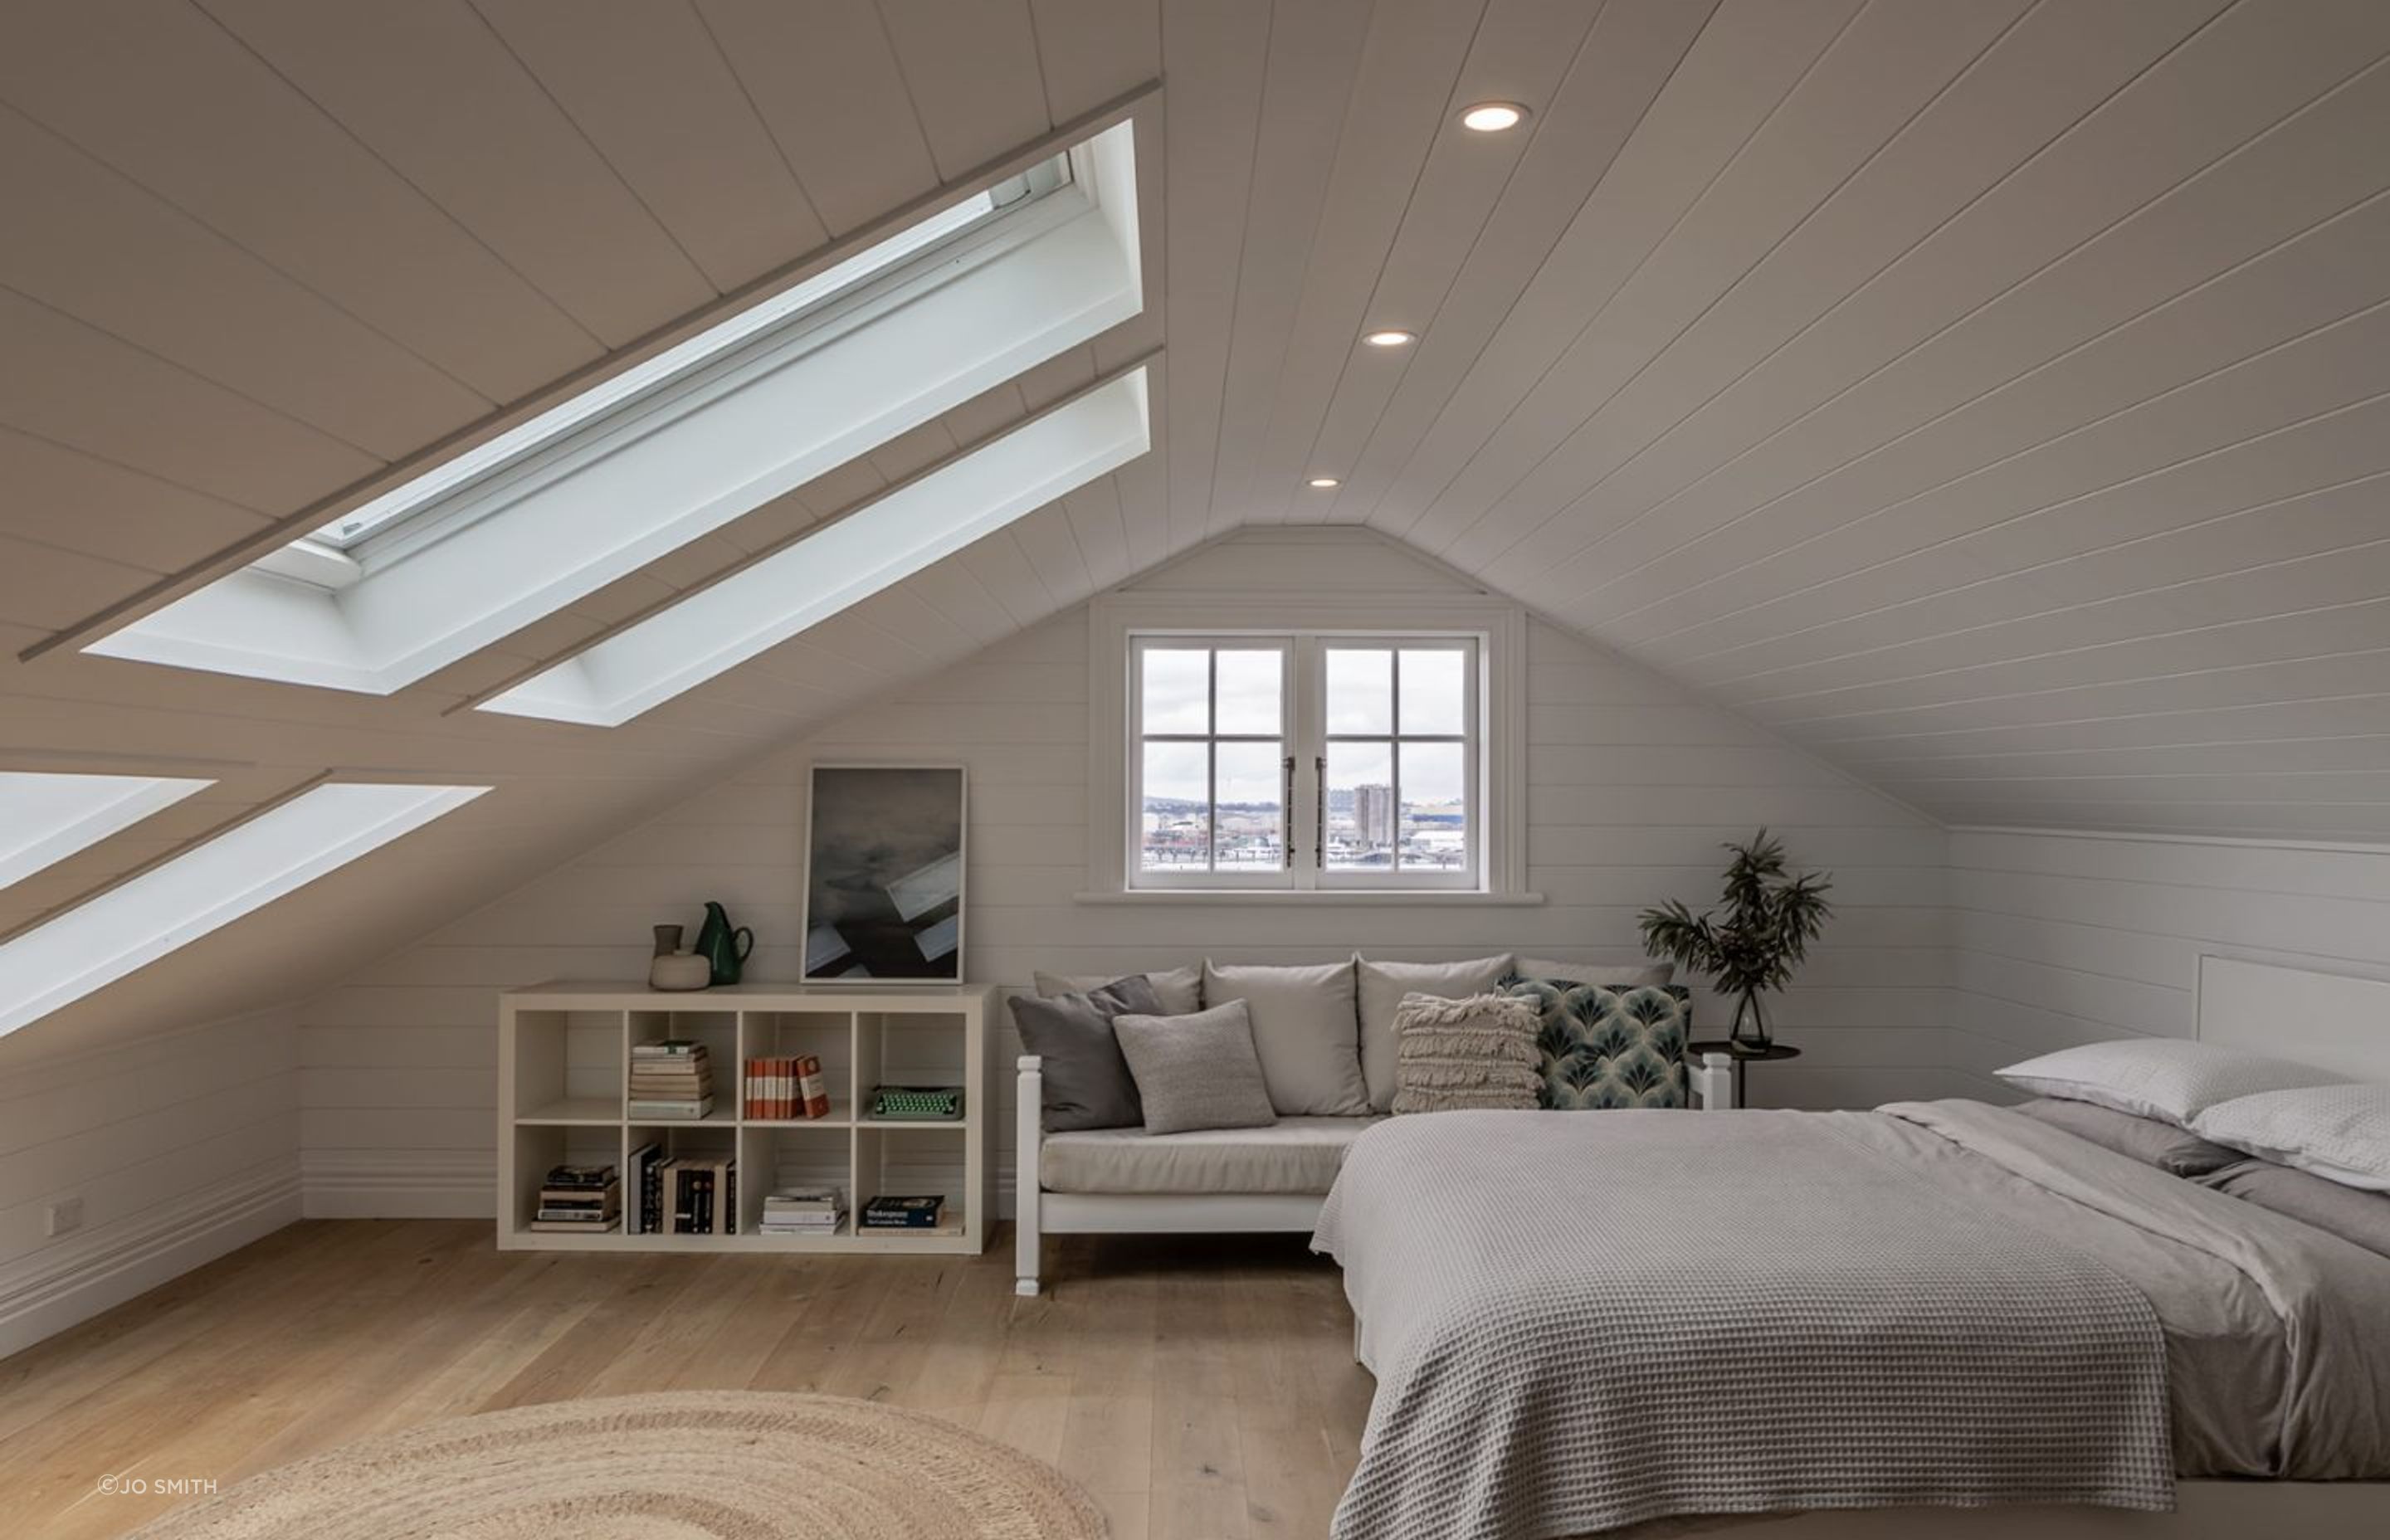 The attice is spacious and light due to large skylights and a neutral colour palette.